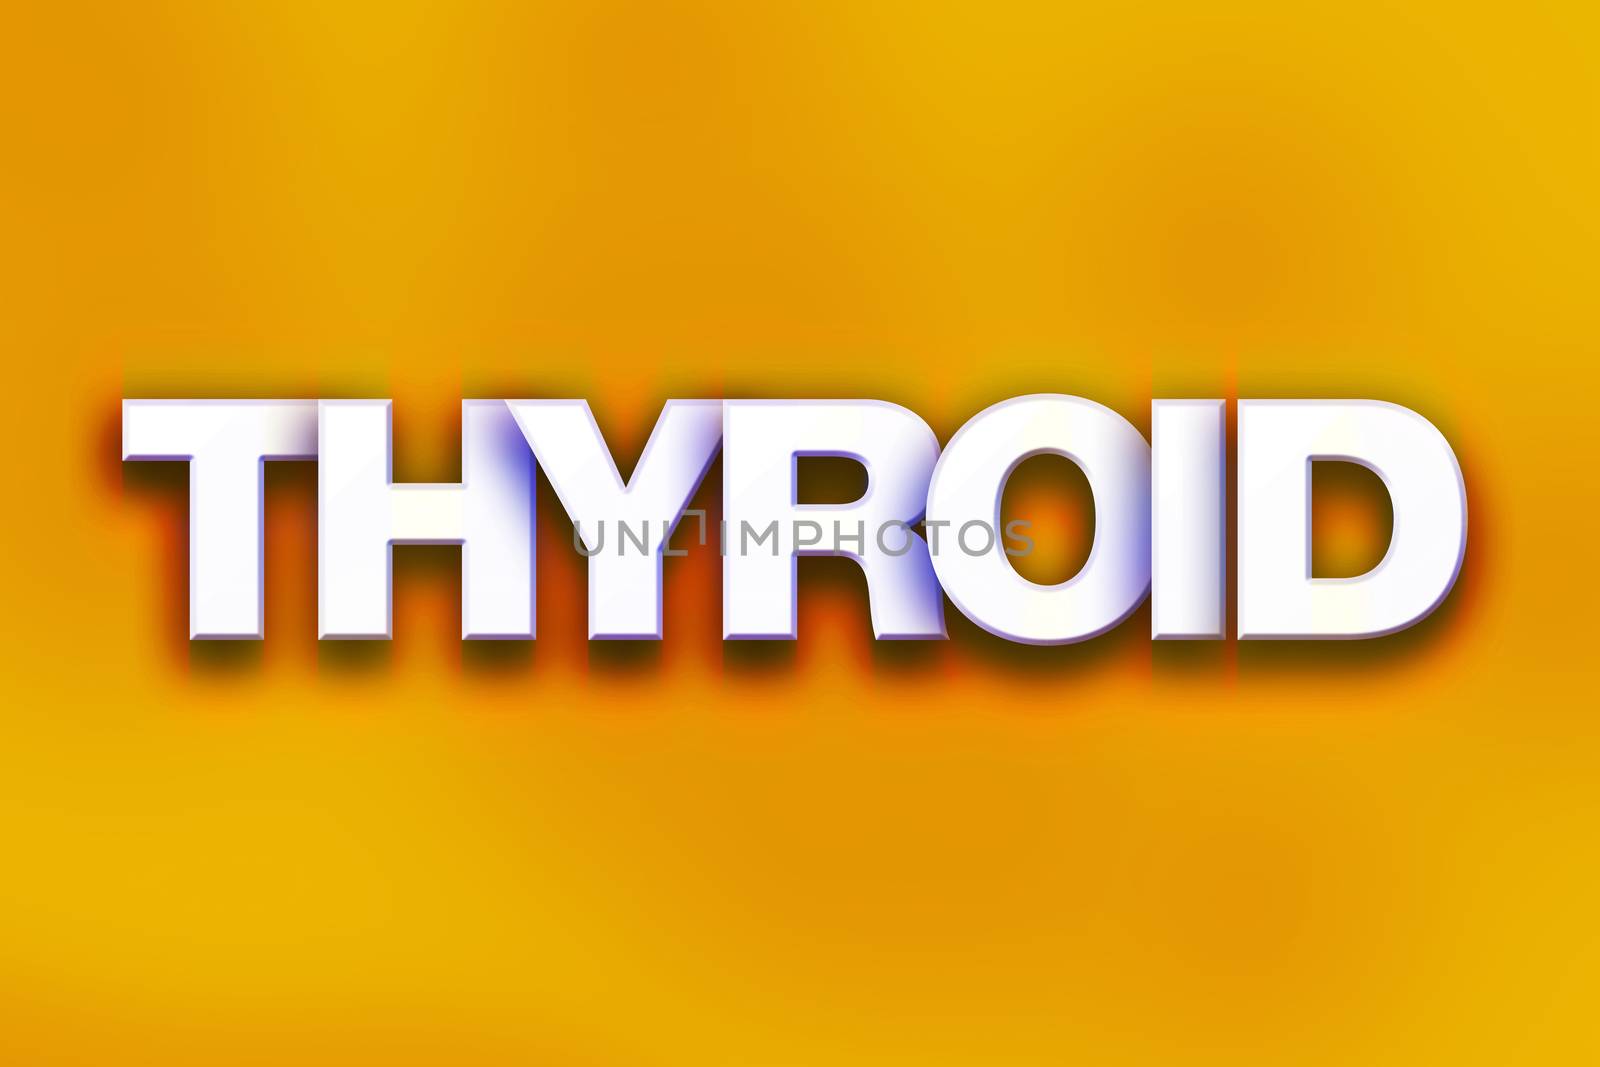 The word "Thyroid" written in white 3D letters on a colorful background concept and theme.